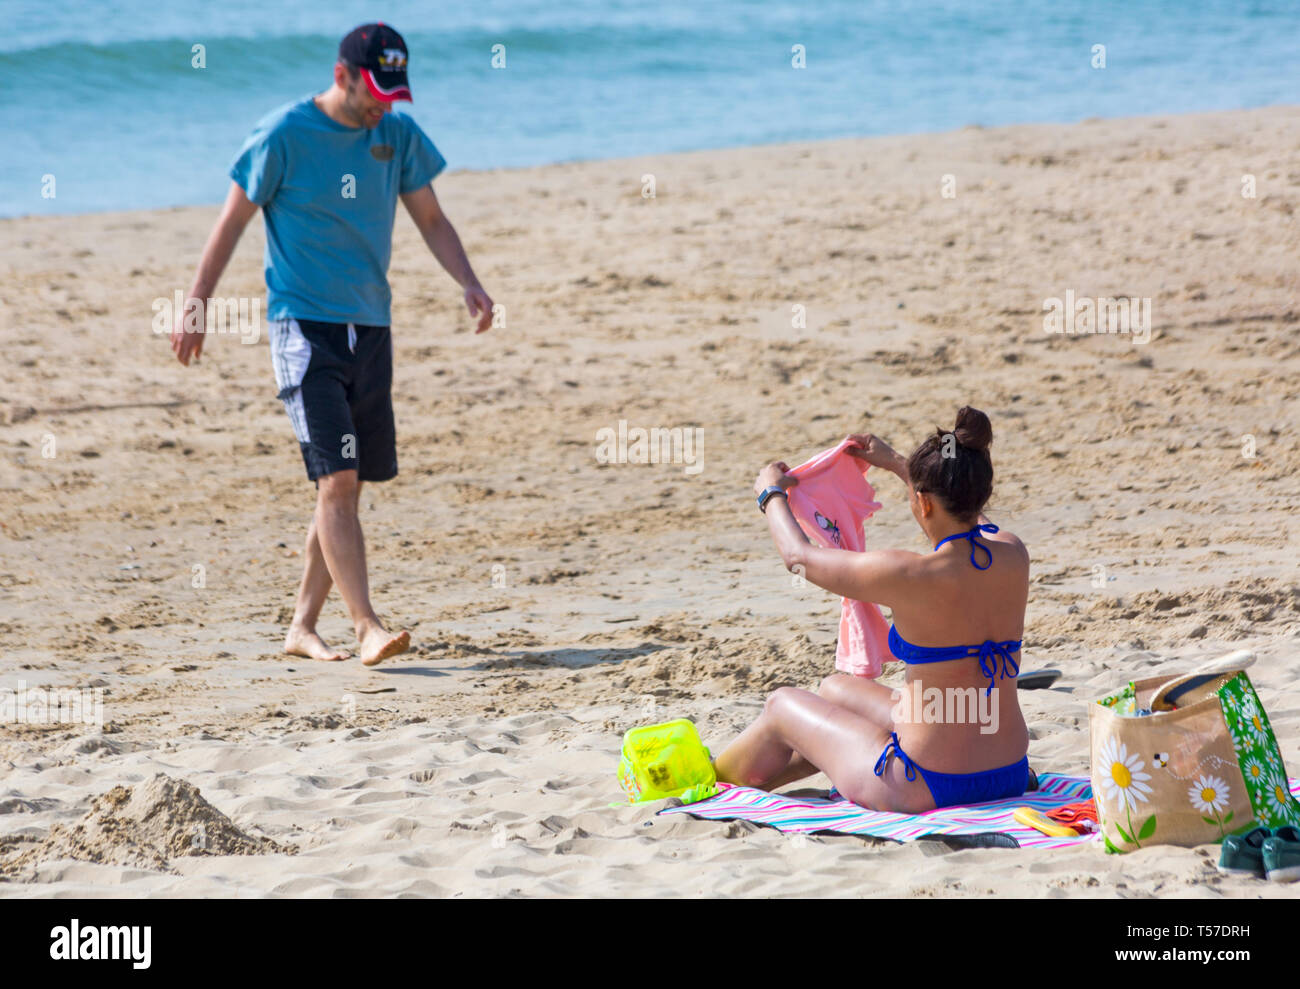 Bournemouth, Dorset, UK. 22nd Apr, 2019. UK weather: after a hazy start the glorious weather continues with hot and sunny weather, as beachgoers head to the seaside to enjoy the heat and sunshine at Bournemouth beaches on Easter Monday before the weather changes and the return to work. Woman in blue bikini sunbathing at the beach with man walking towards her. Credit: Carolyn Jenkins/Alamy Live News Stock Photo